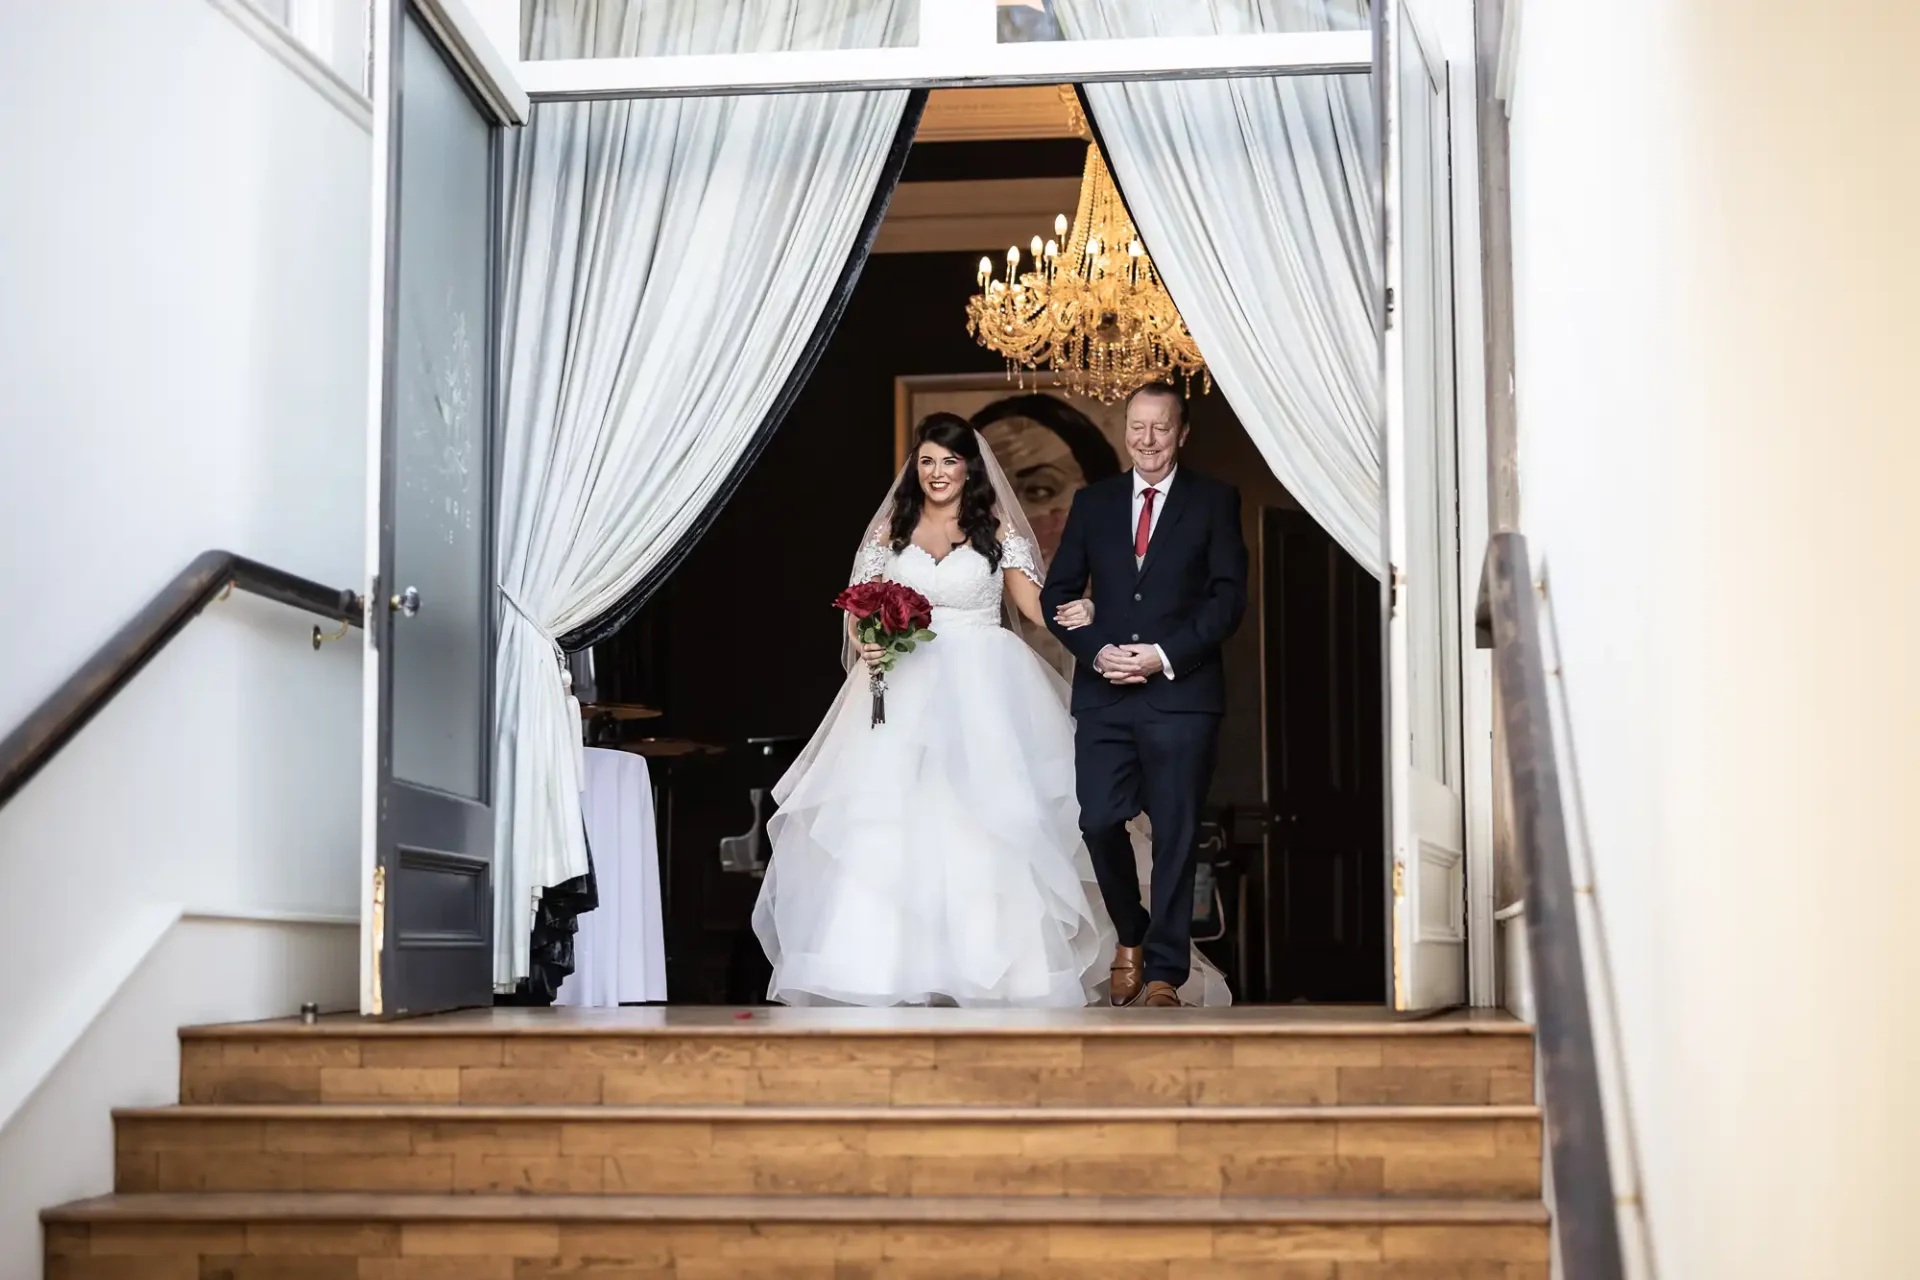 A bride and groom smiling as they descend a staircase, the bride holding a bouquet, with an elegant chandelier above.